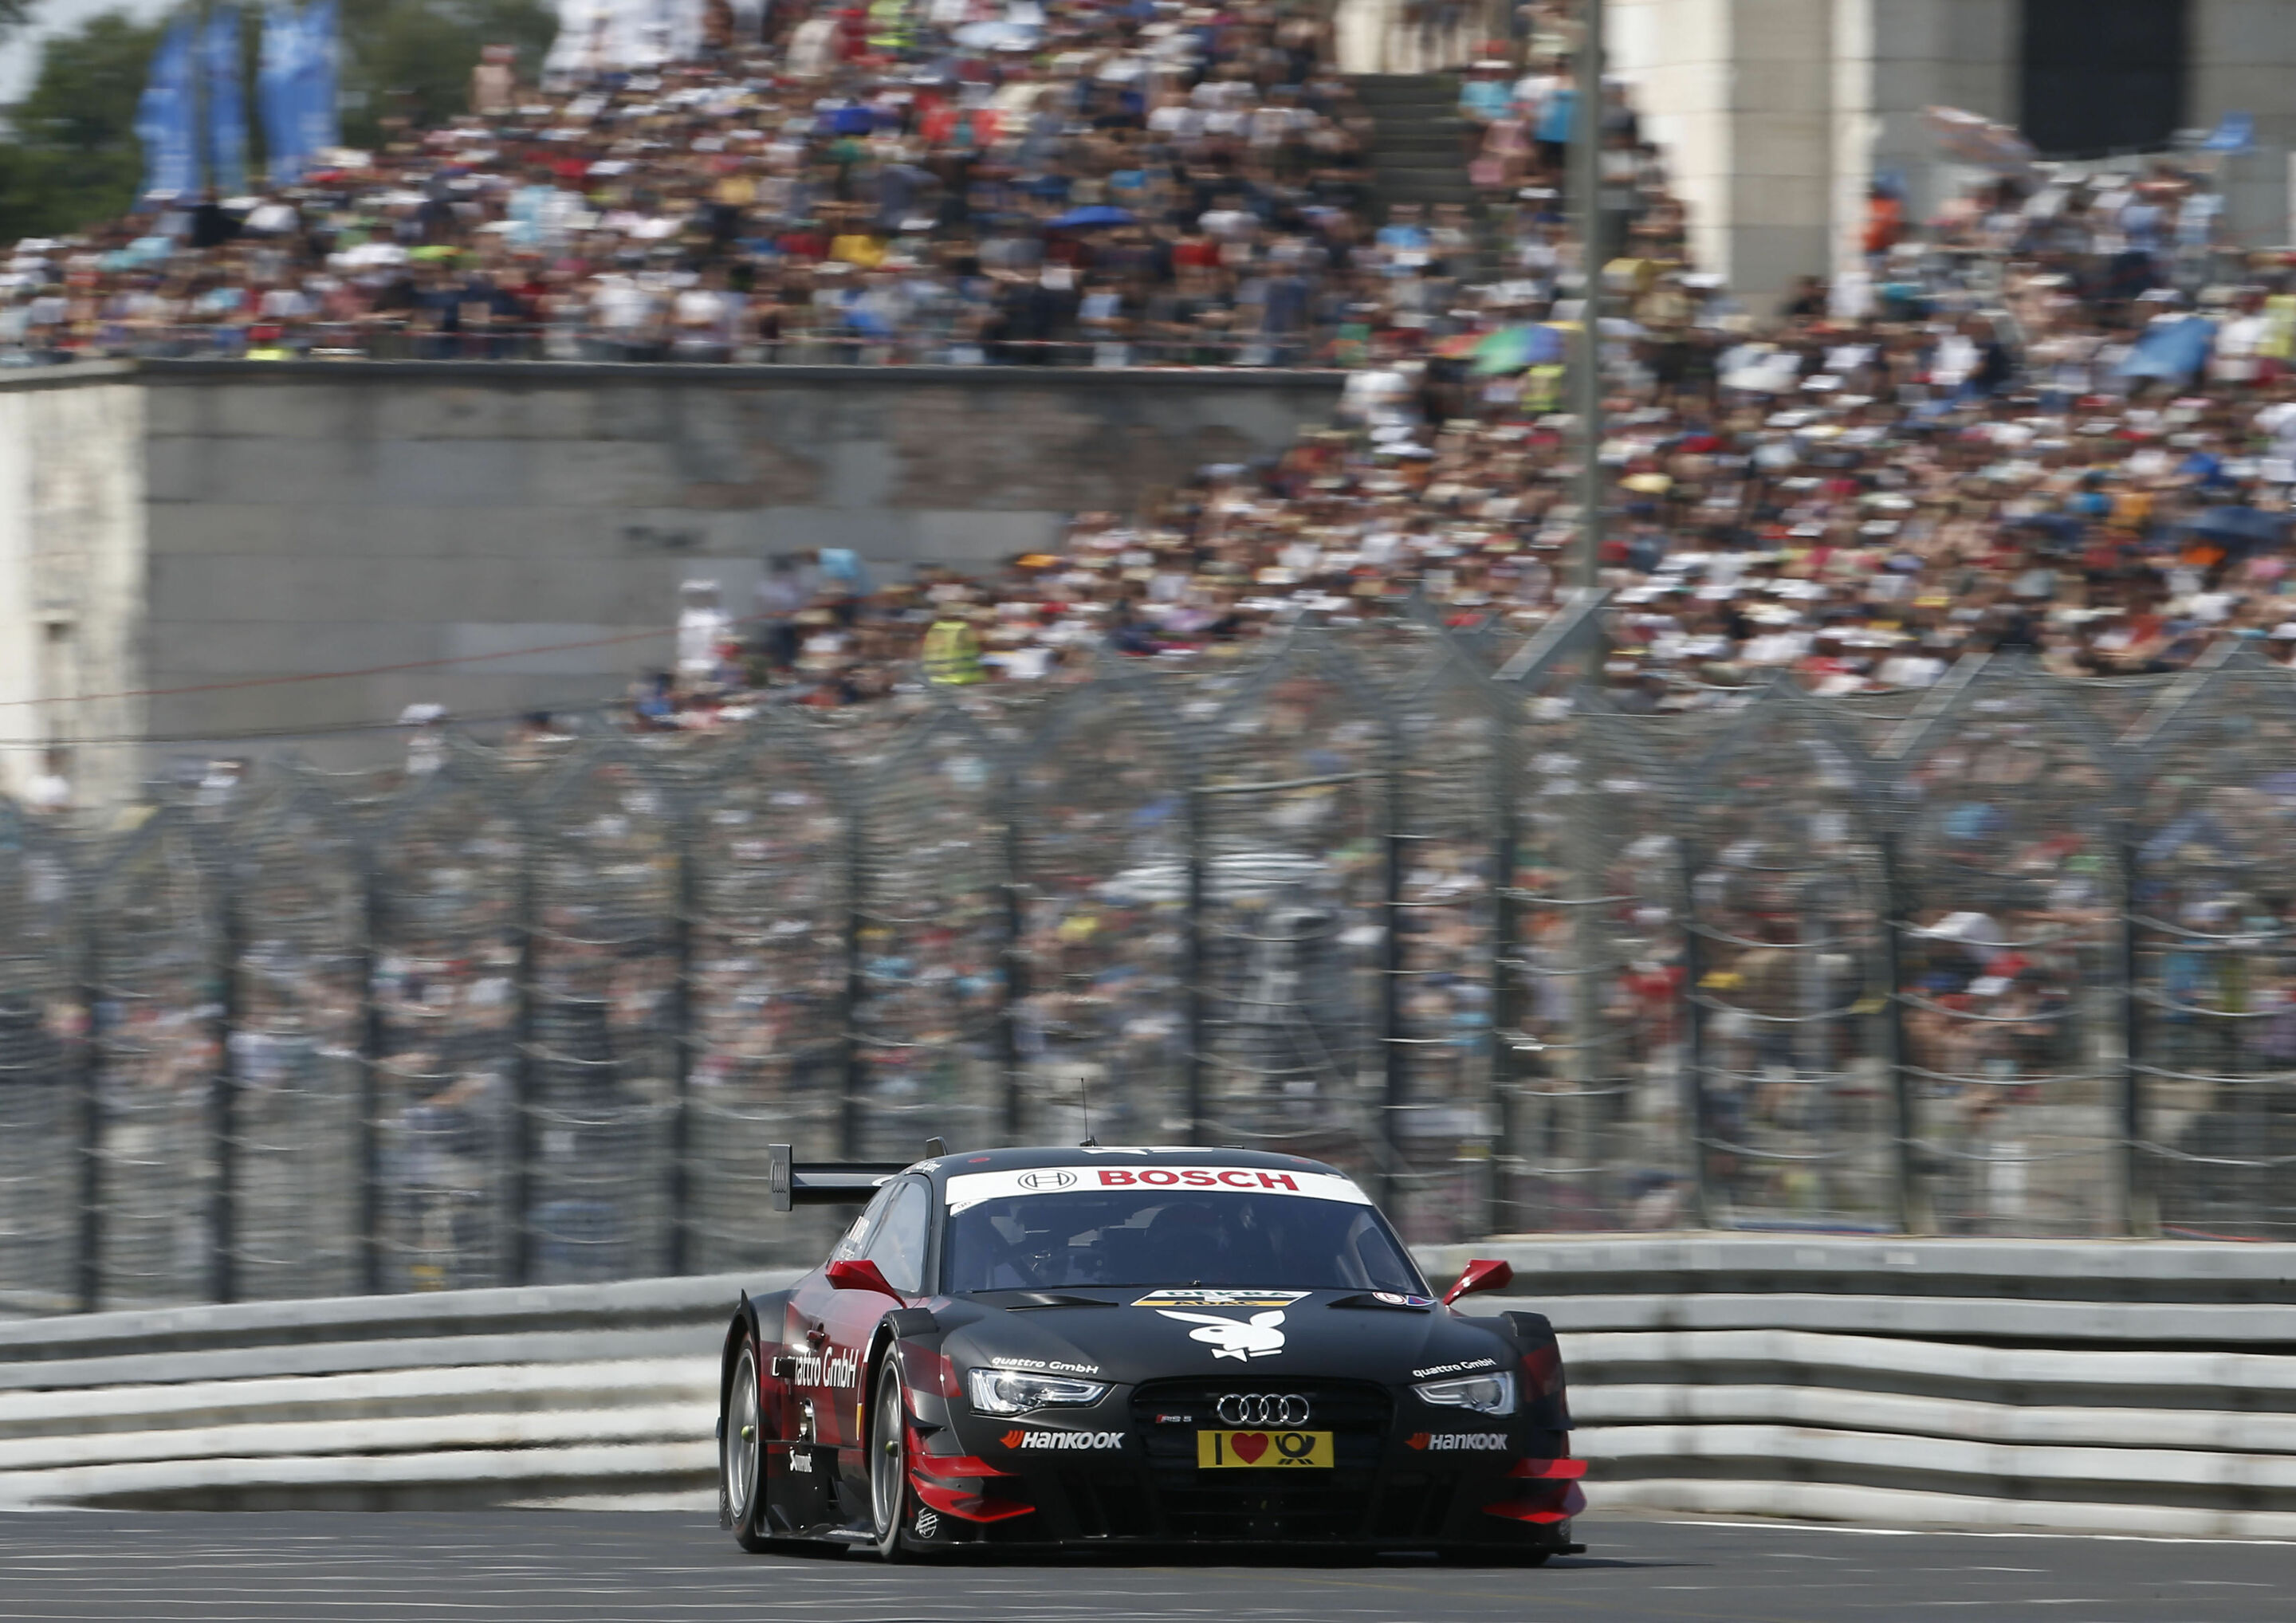 Quotes after qualifying at the Norisring